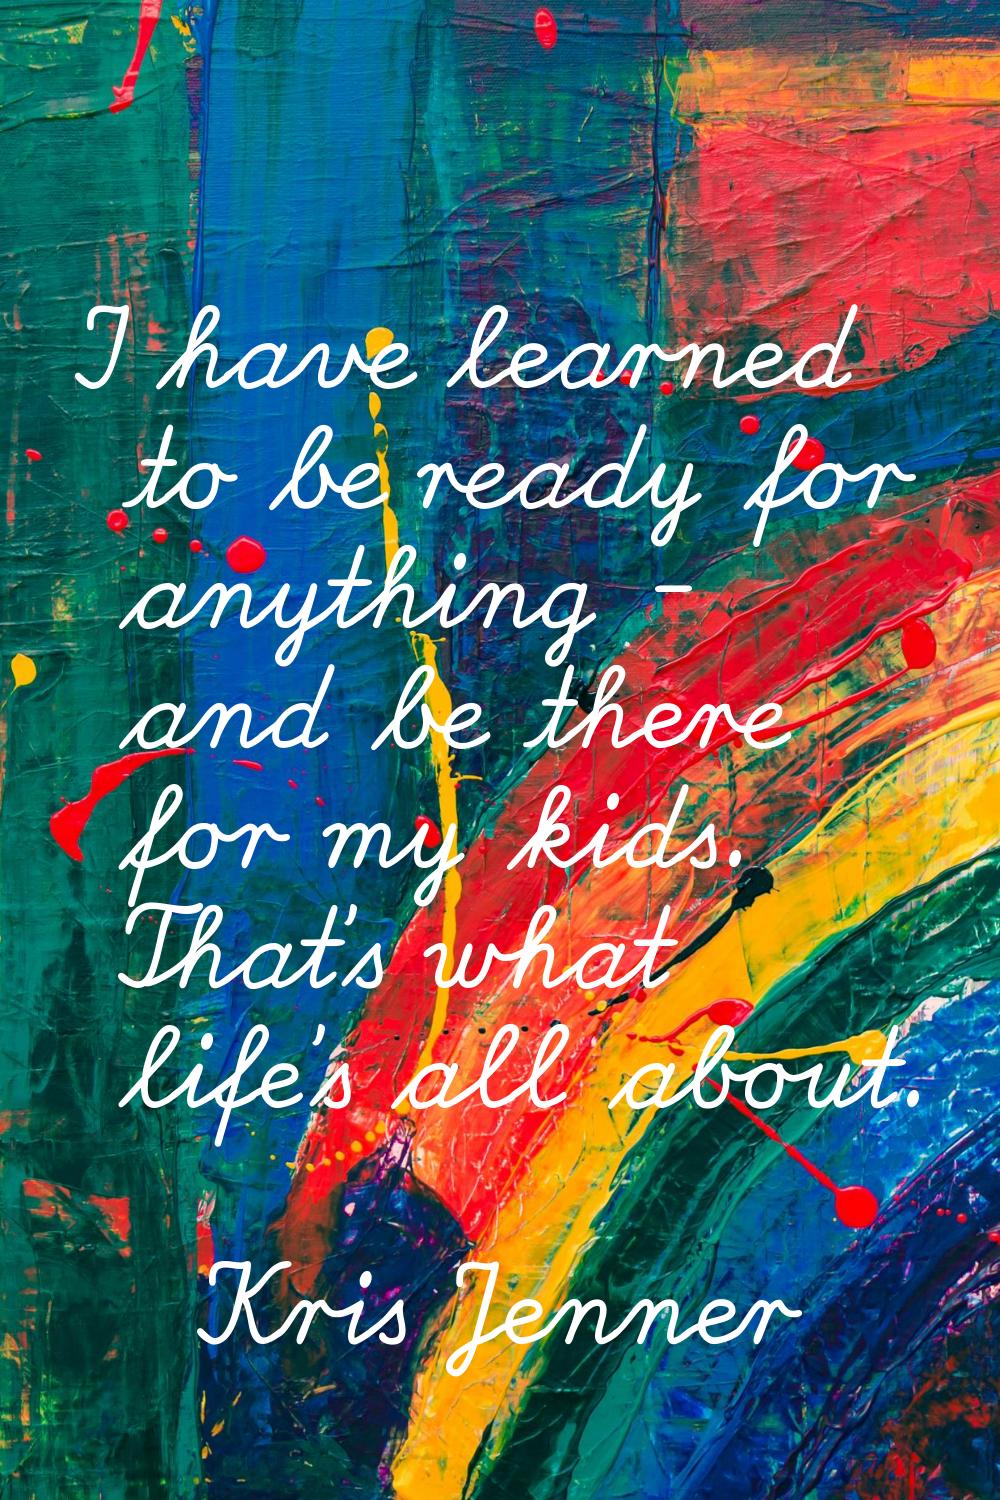 I have learned to be ready for anything - and be there for my kids. That's what life's all about.